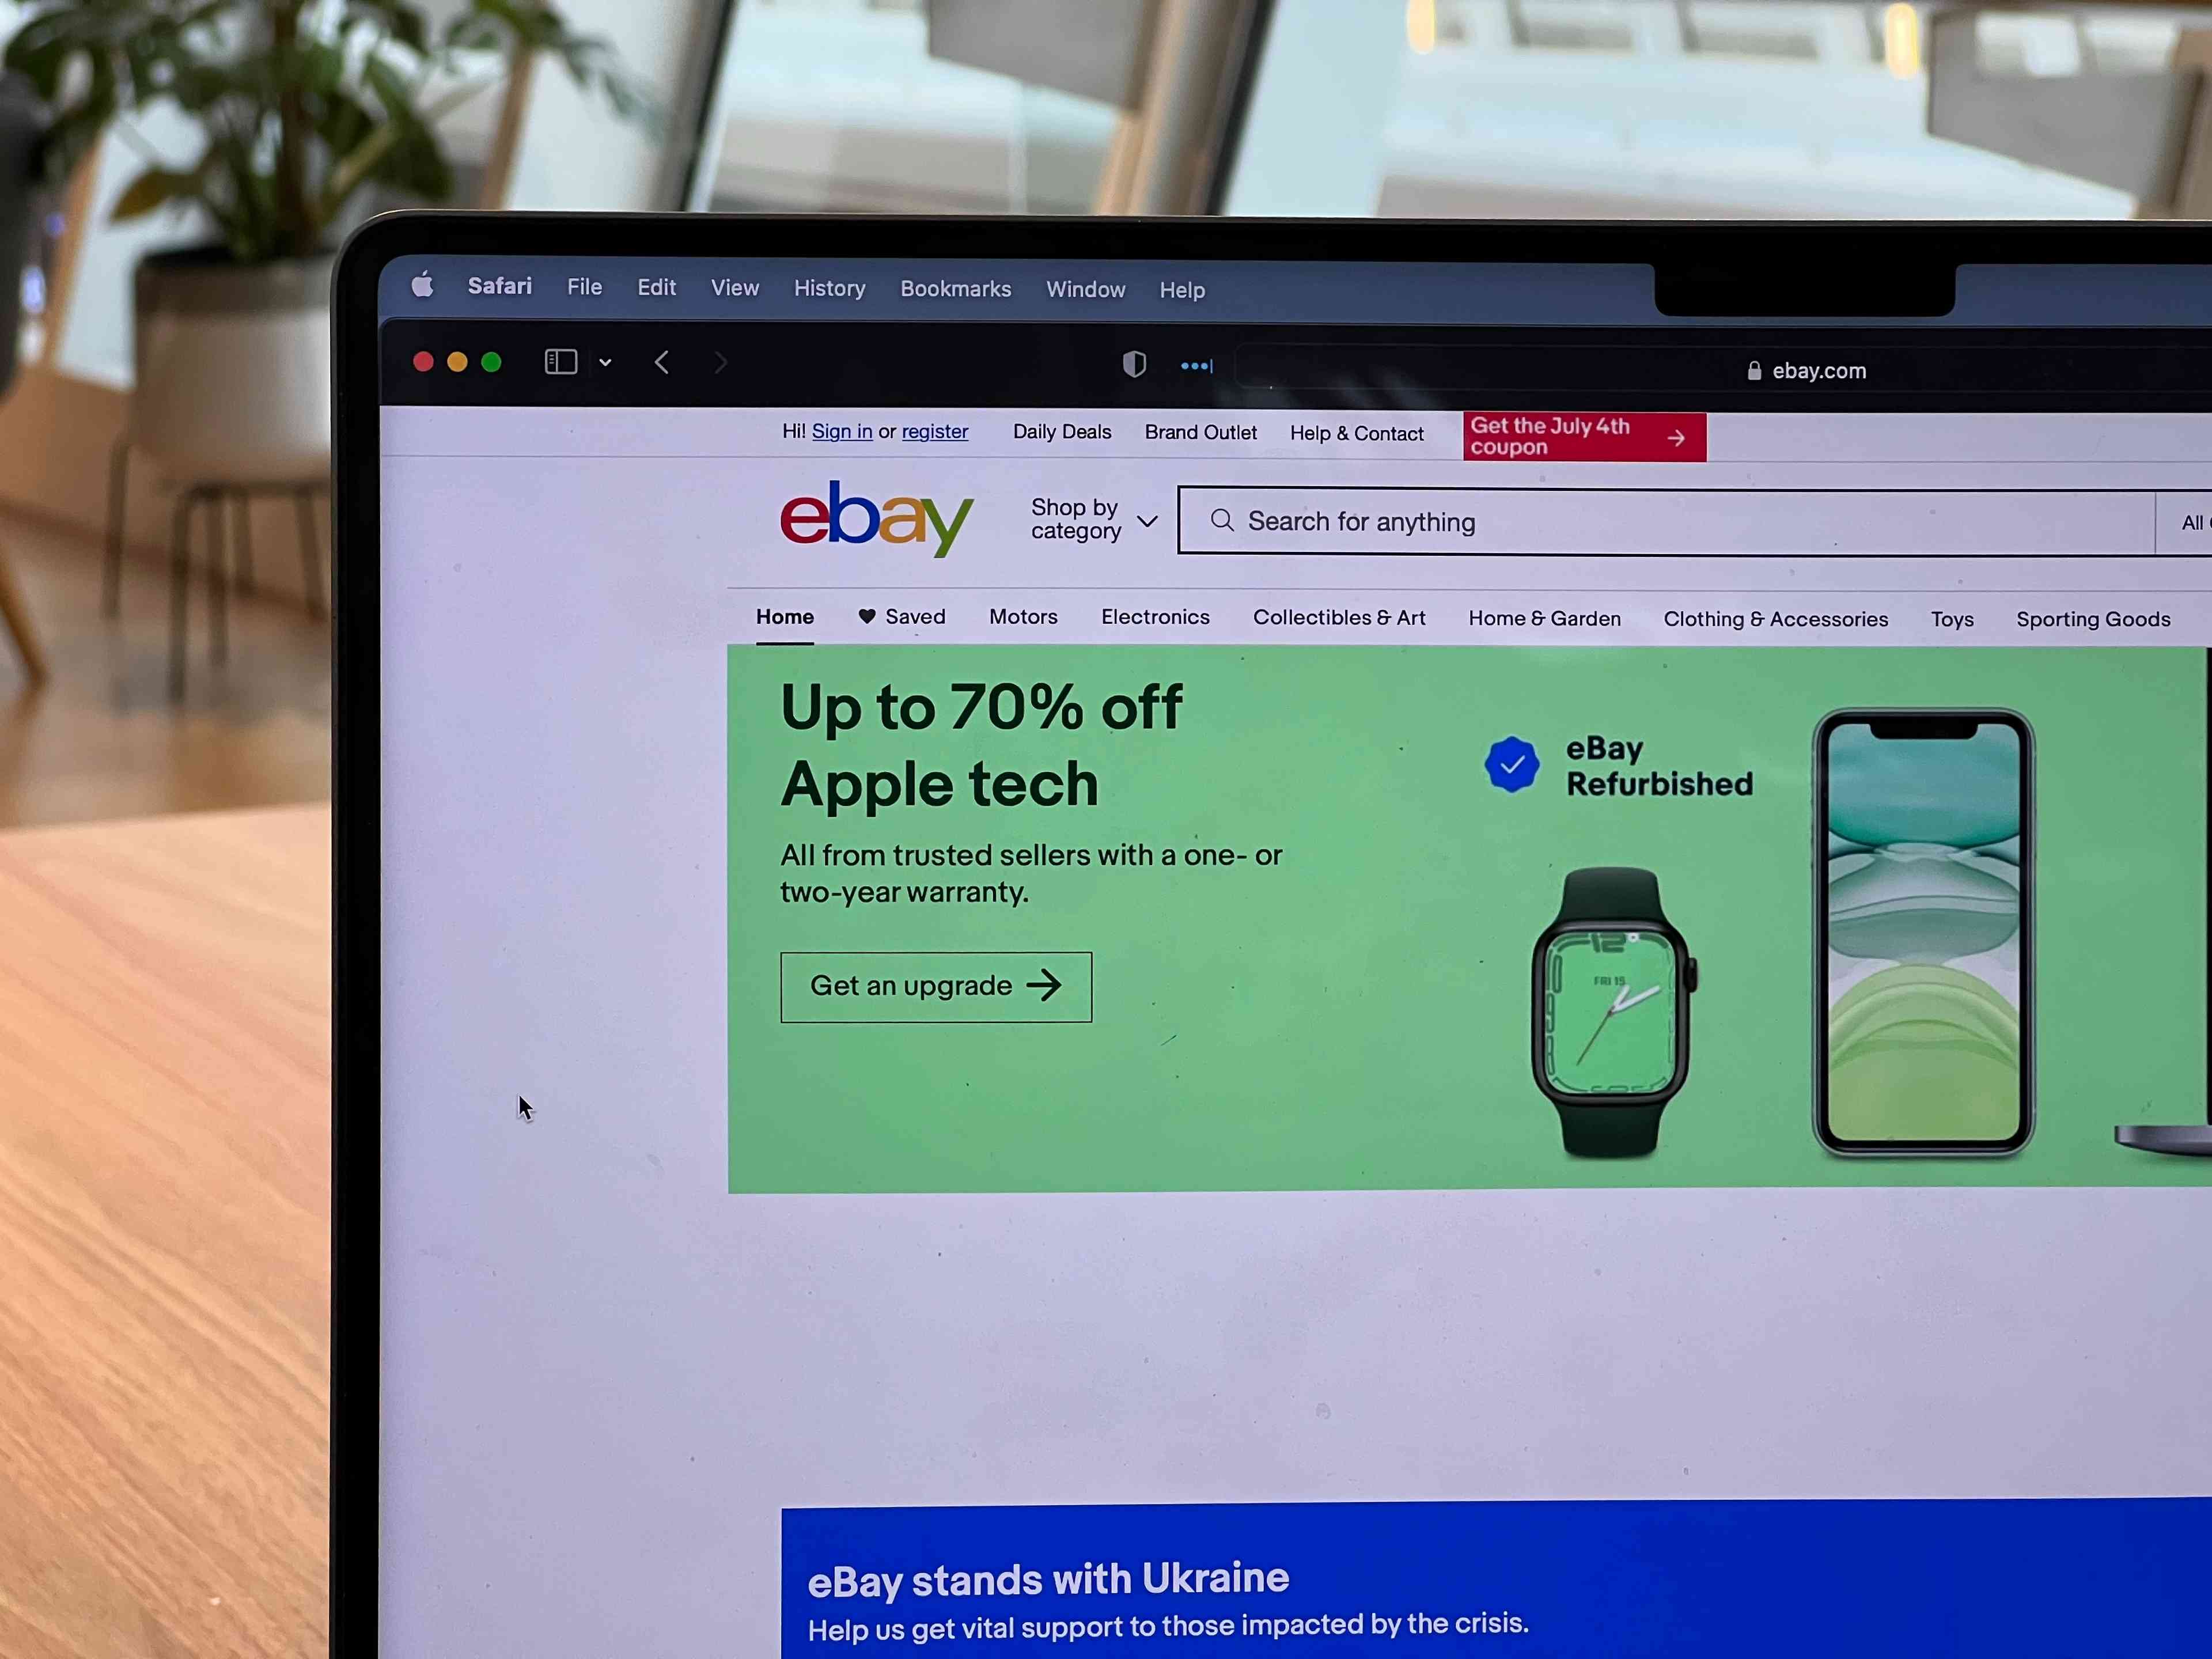 Getting Started on eBay: A Beginner's Guide to Selling Your Products